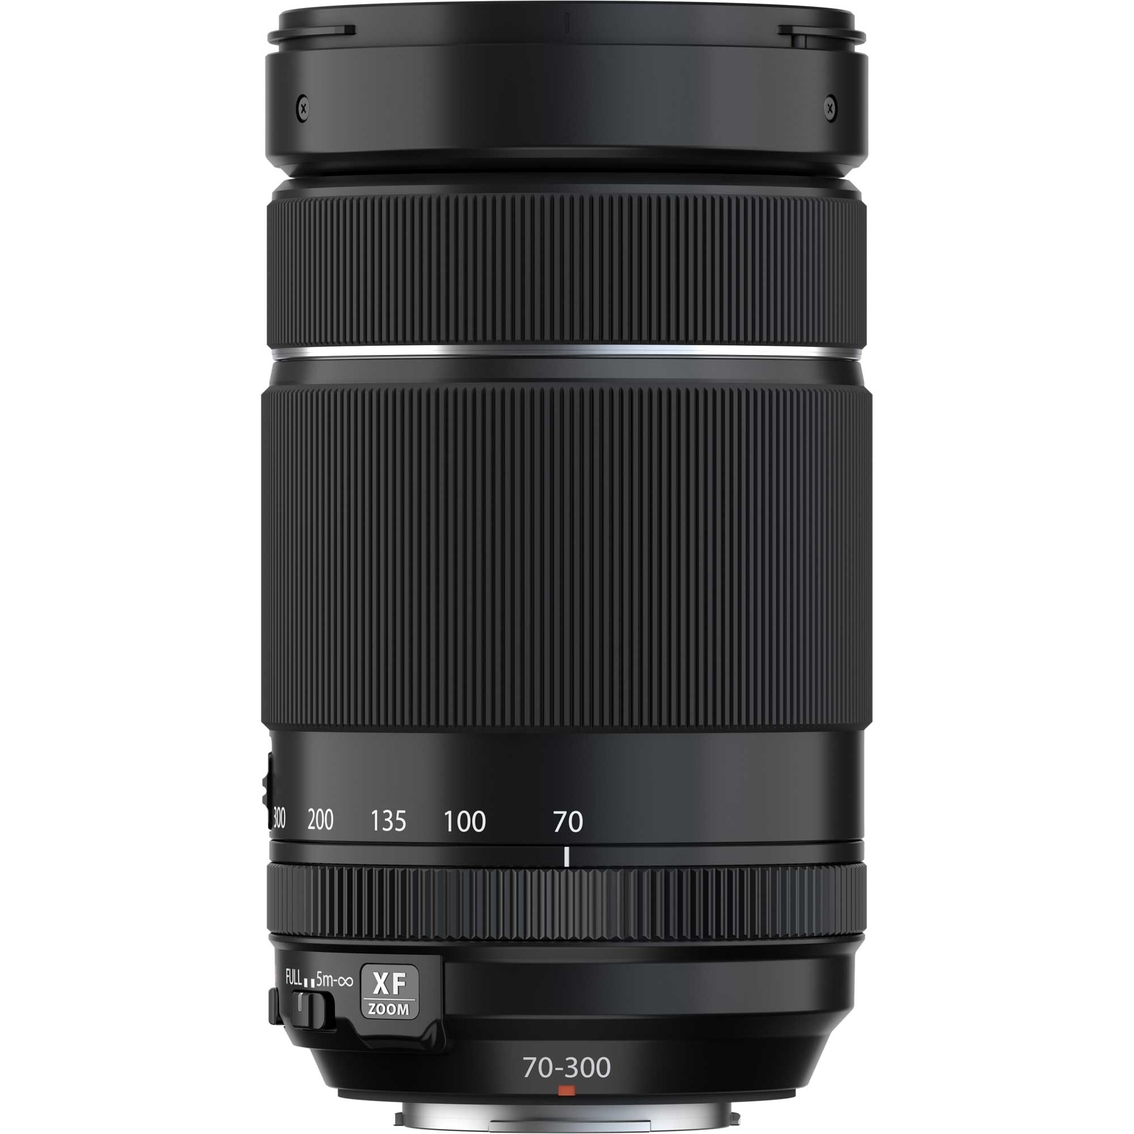 Fujinon XF70-300mmF4-5.6 R LM OIS WR Lens - Image 2 of 2